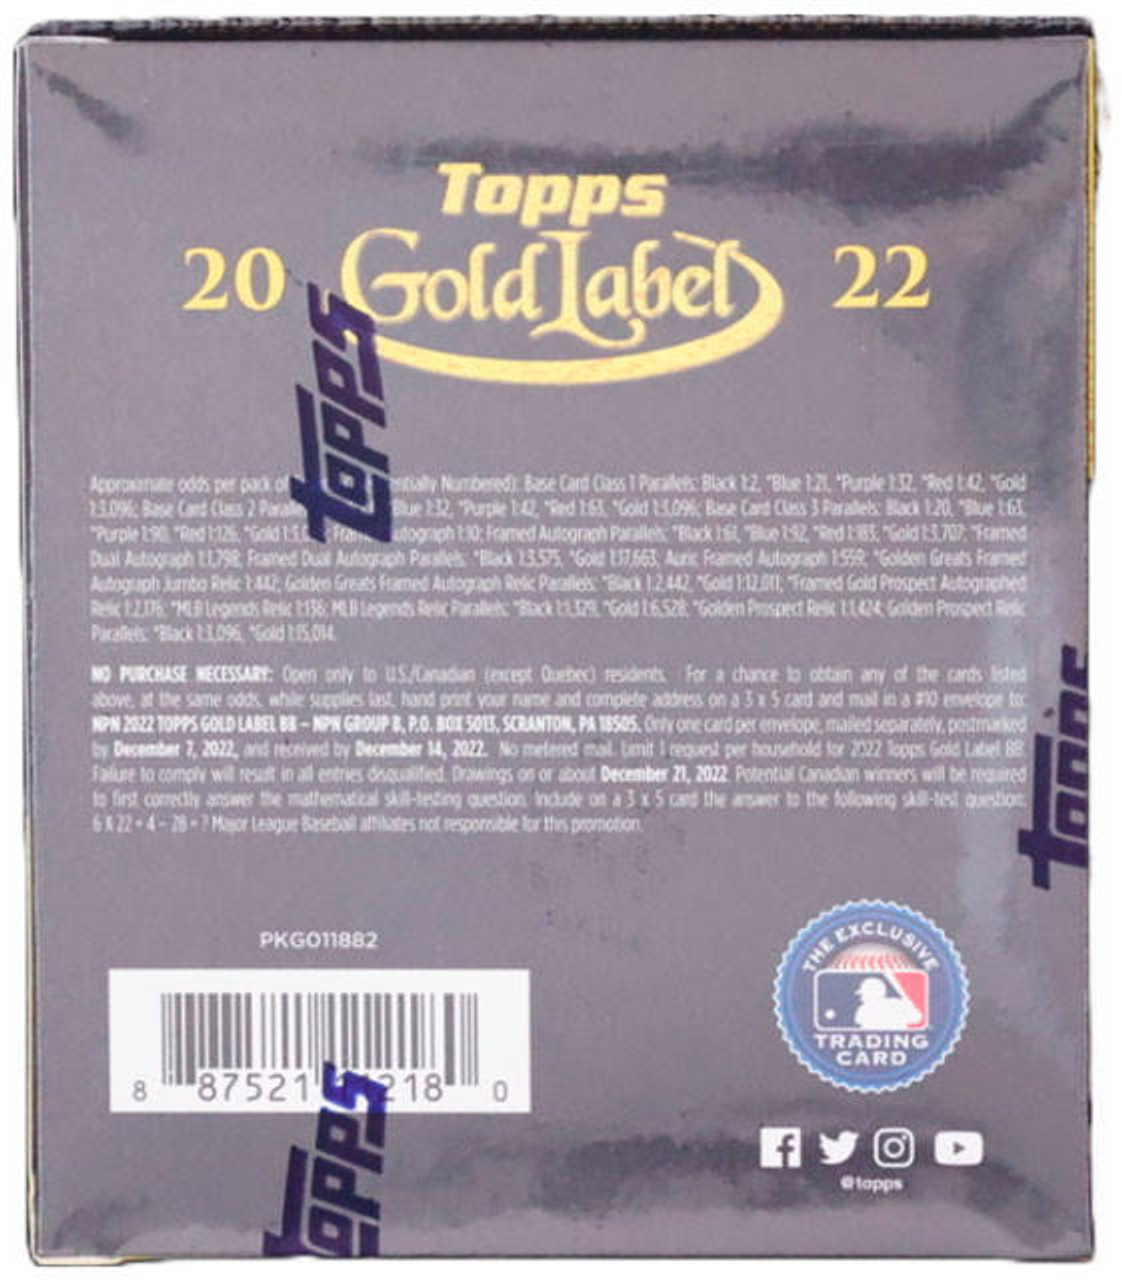 Watch: Box break of 2020 Topps Gold Label baseball cards, from